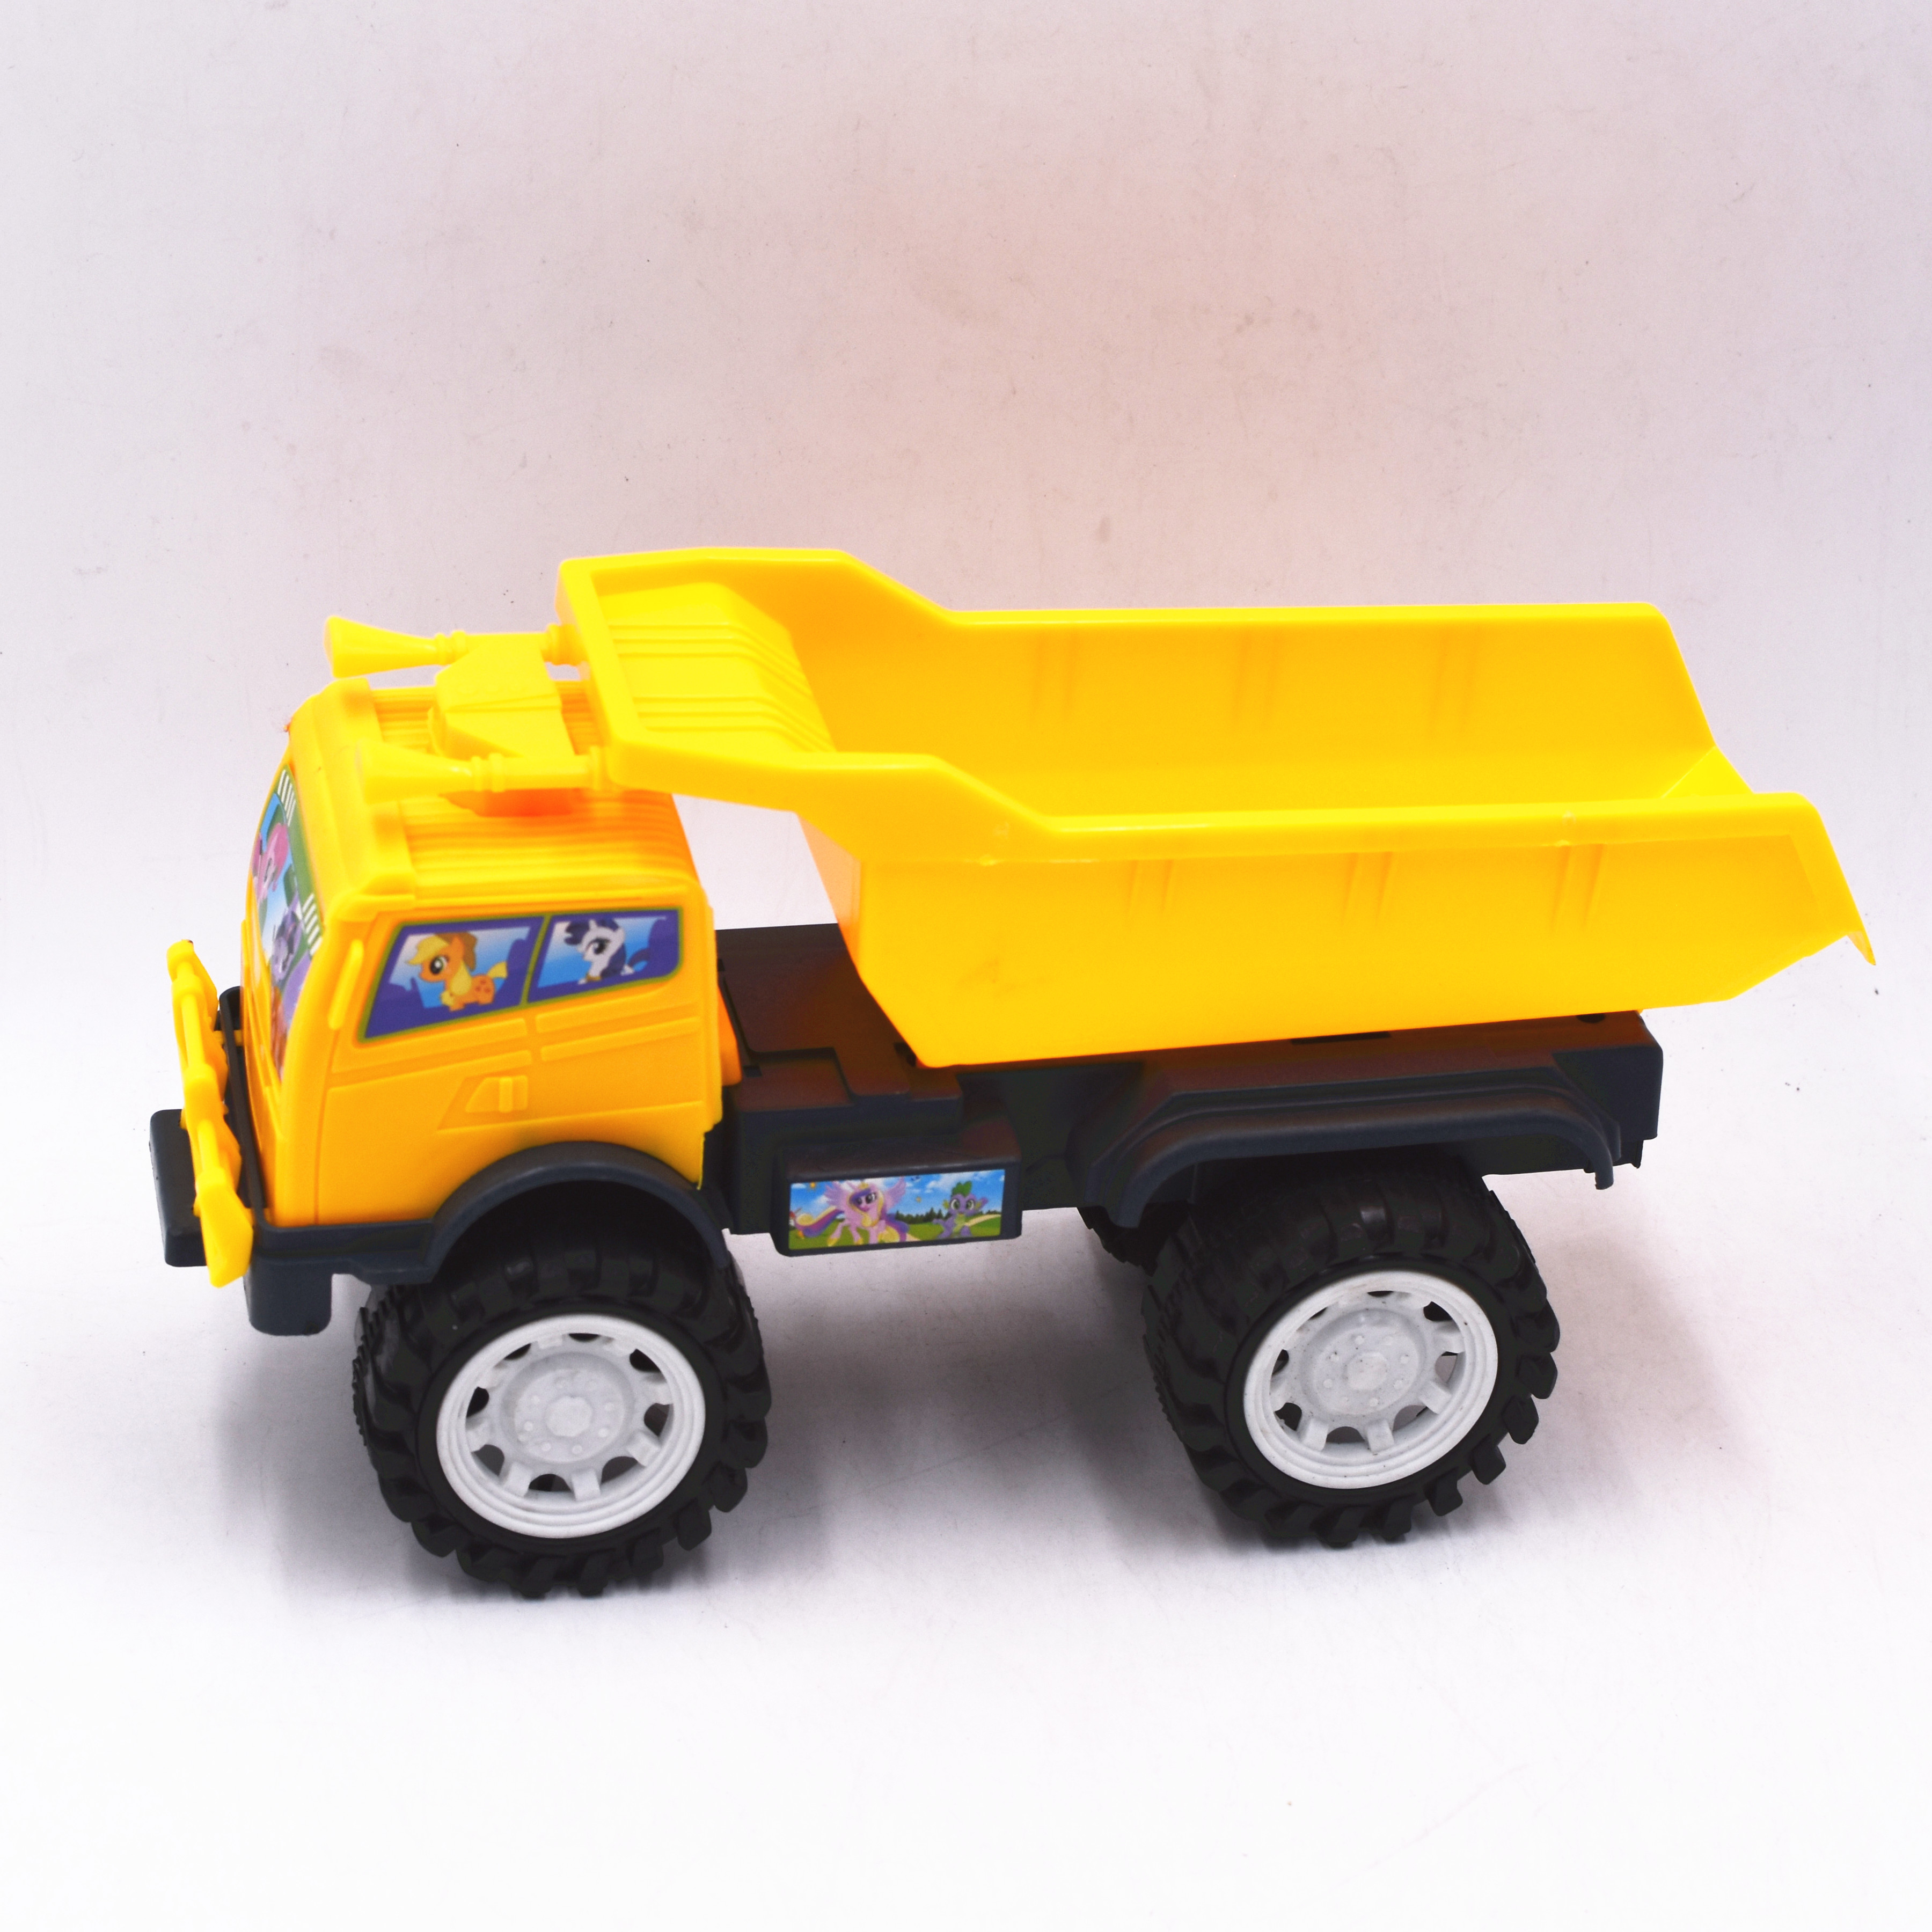 FREE WHEEL TRUCK TOY LY1730